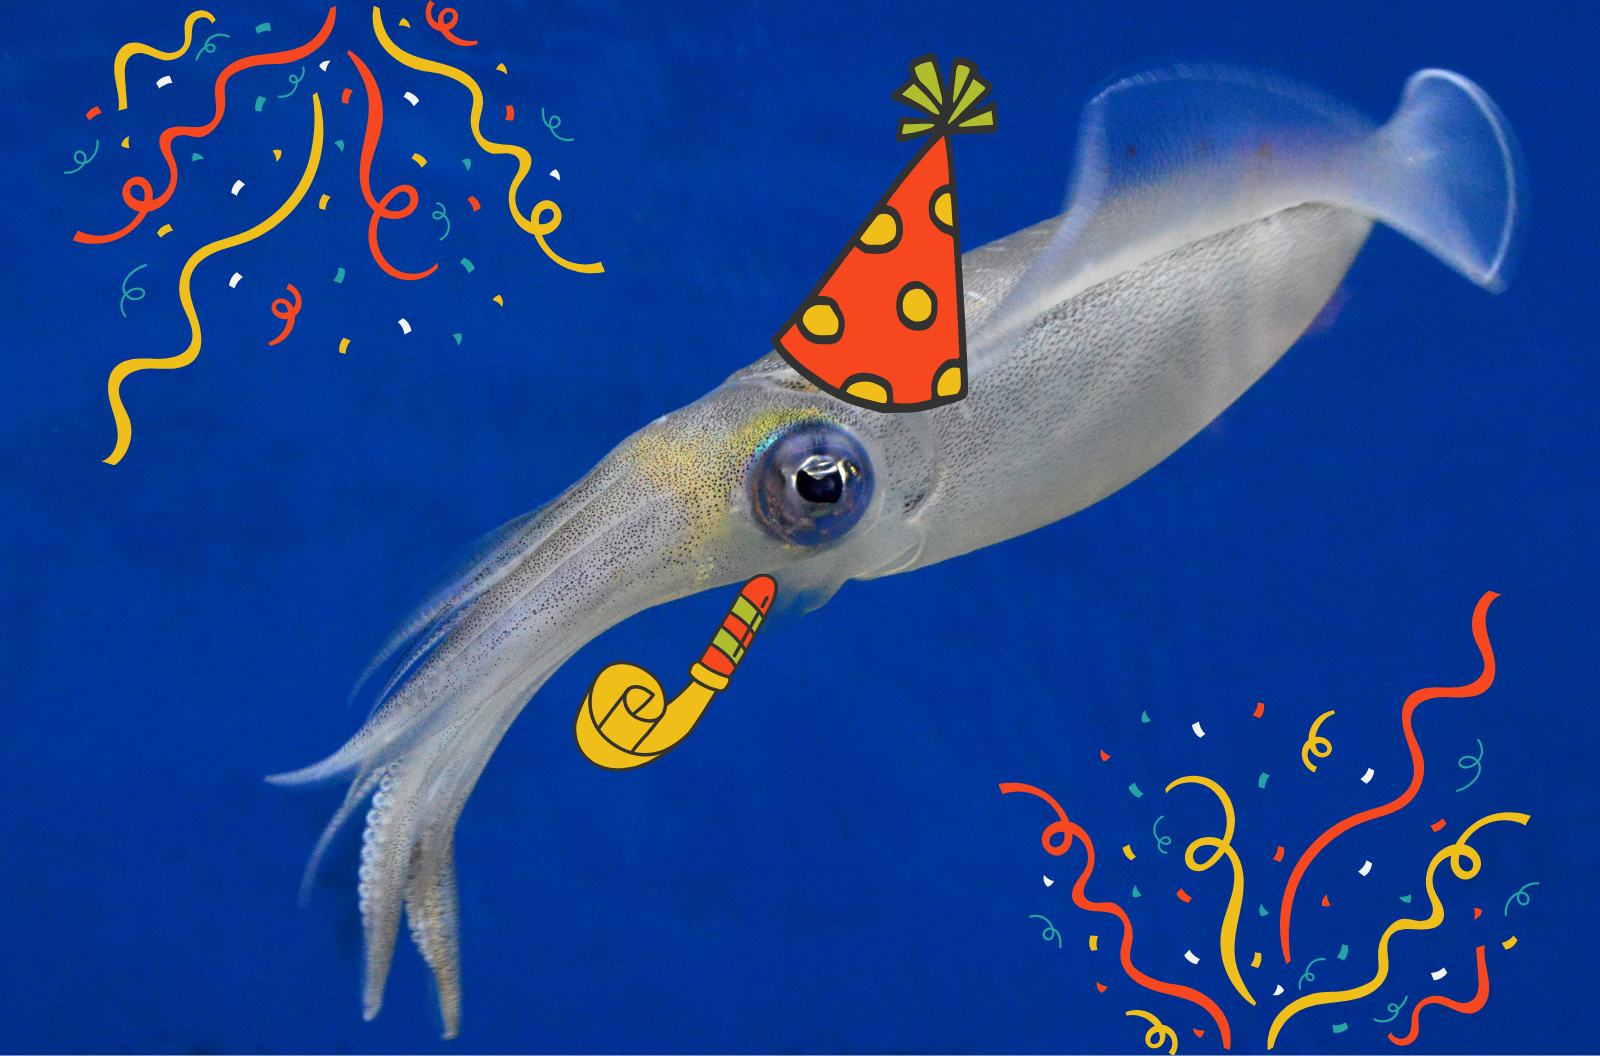 A silvery squid against a blue background. It's wearing a party hat and has a party blower. There are streamers in colorful colors surrounding it.